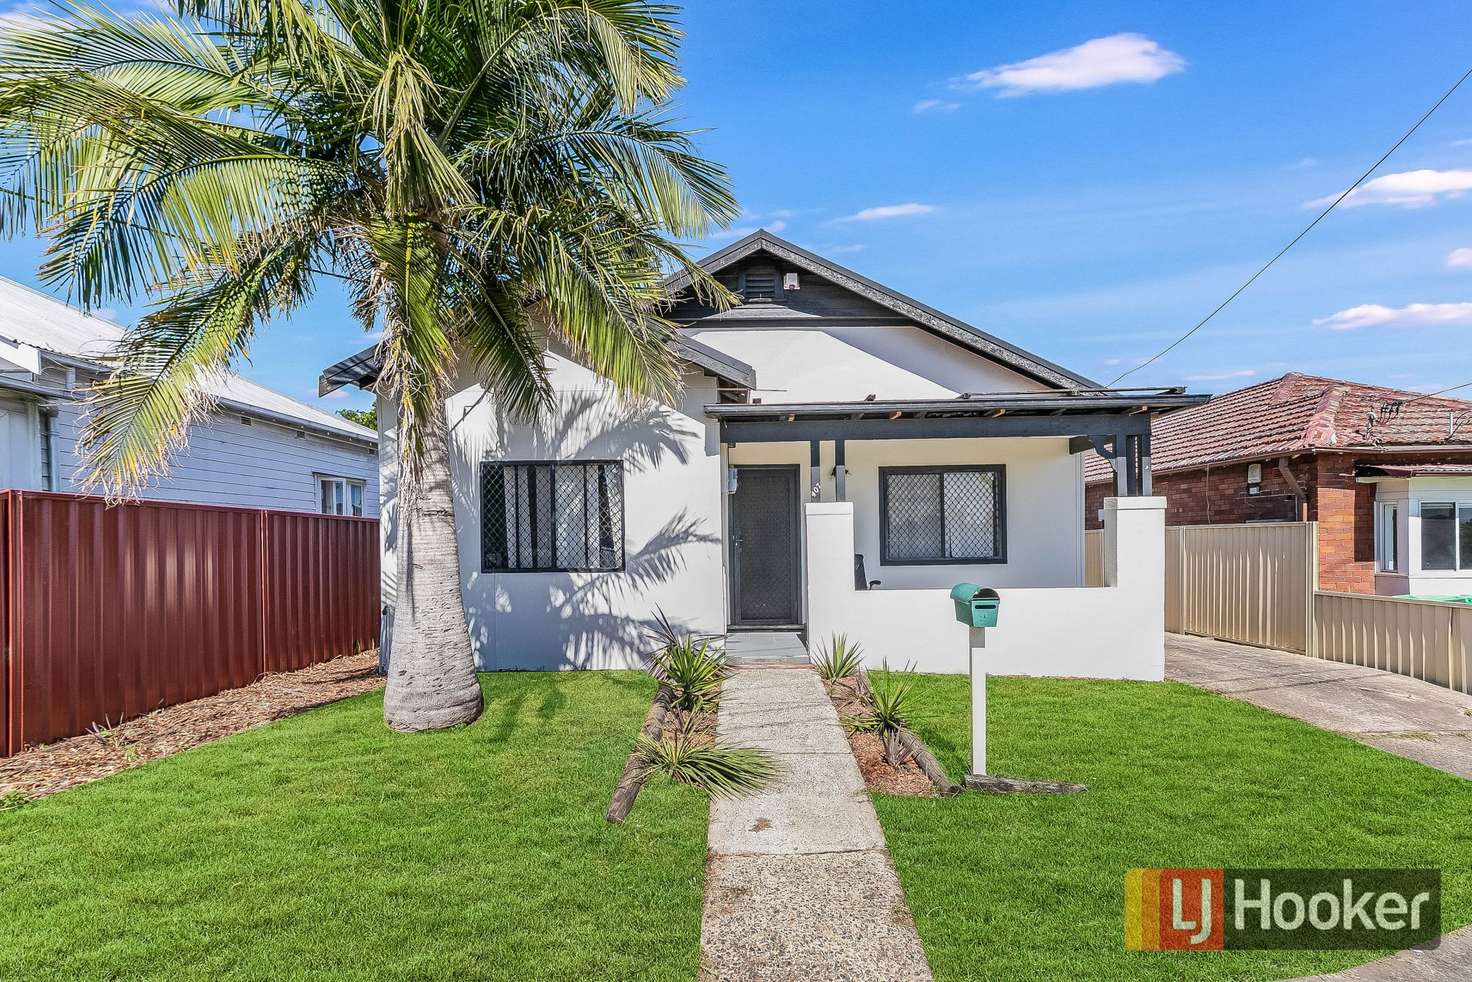 Main view of Homely house listing, 407 Stacey St, Bankstown NSW 2200